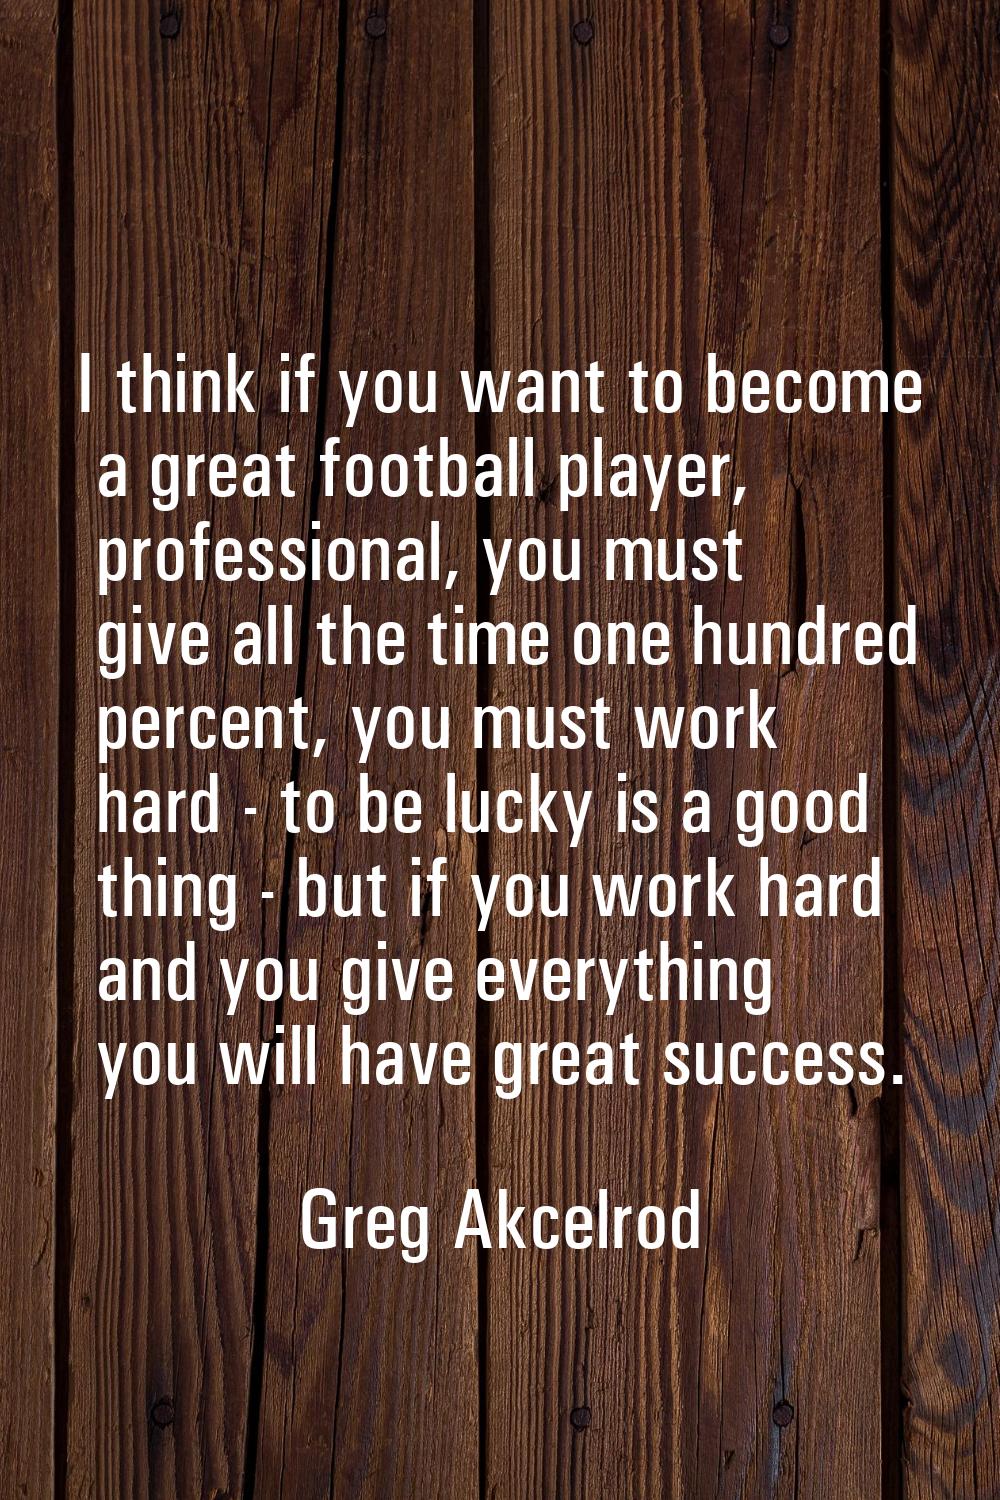 I think if you want to become a great football player, professional, you must give all the time one